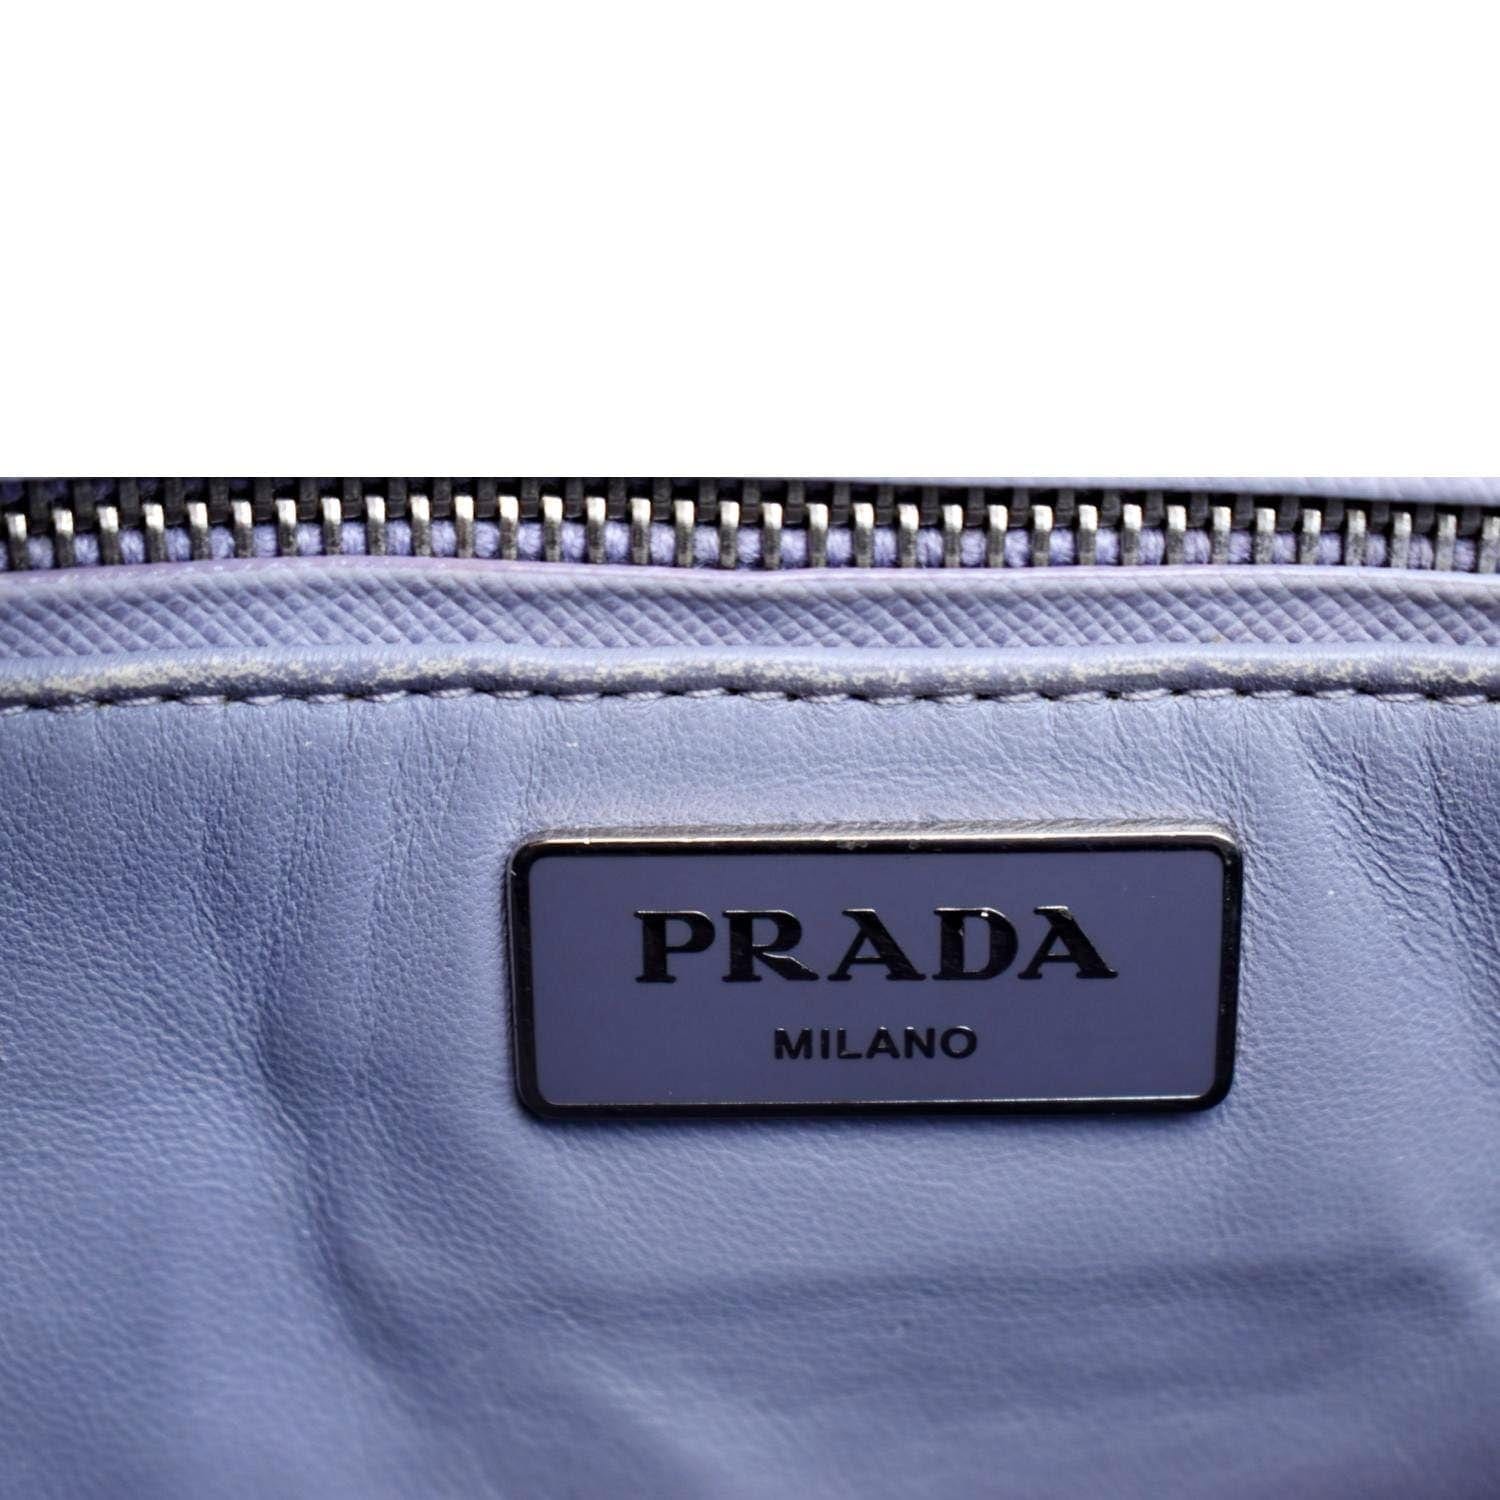 Prada Camel Saffiano Leather Front Pocket Double Zip Tote